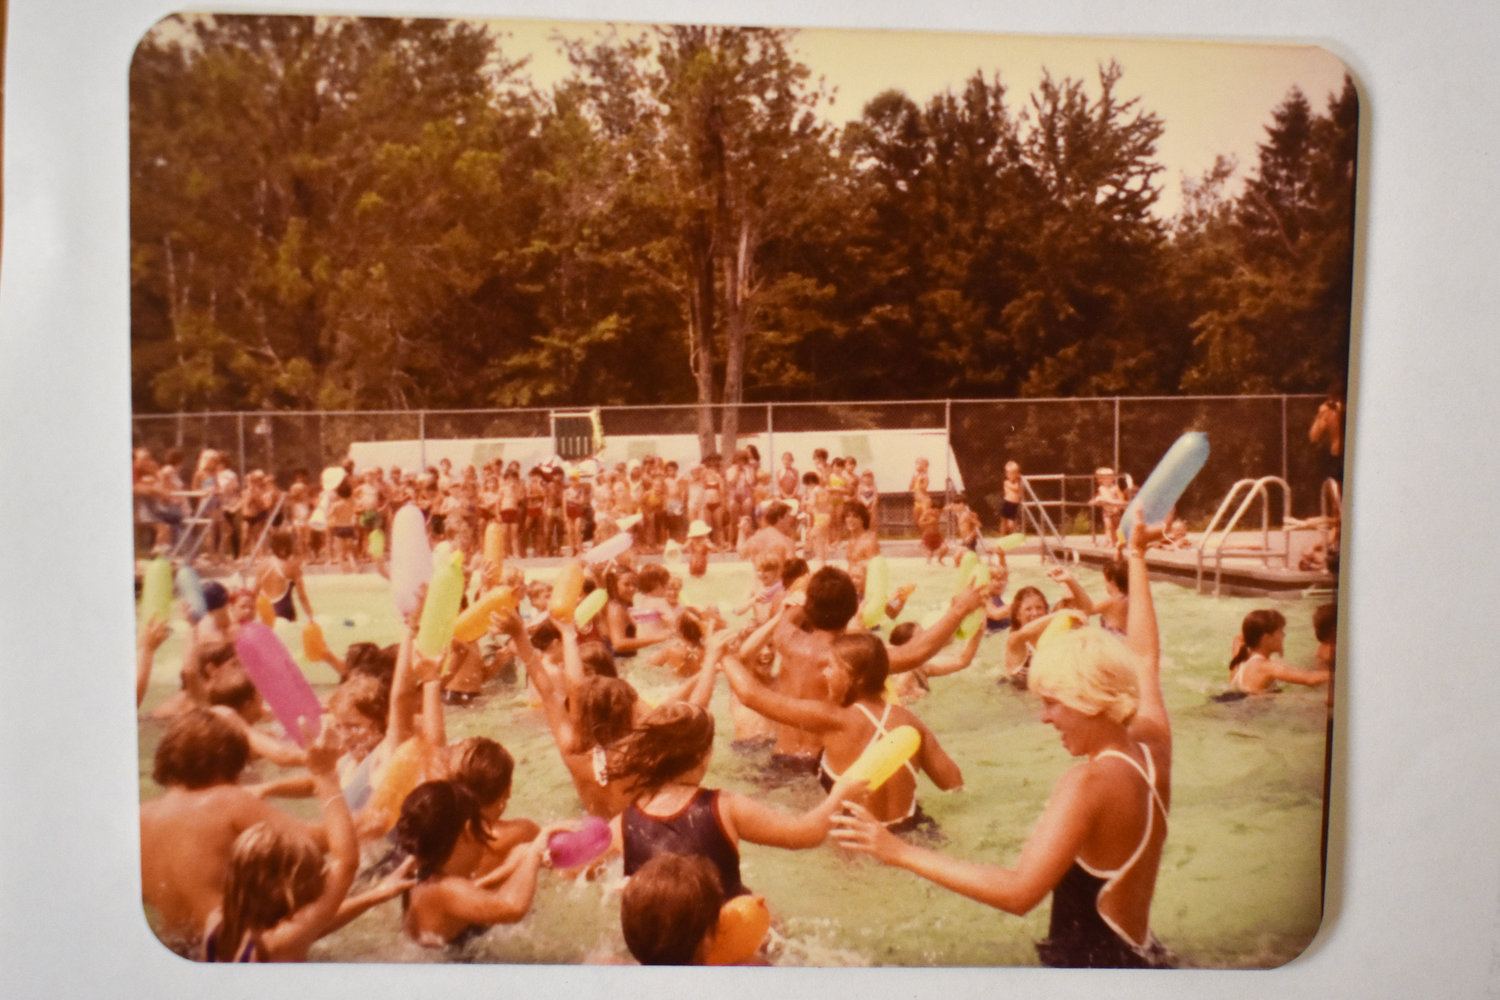 Residents cool off in the pool at Vet's Field, sometime in the 70s-80s.